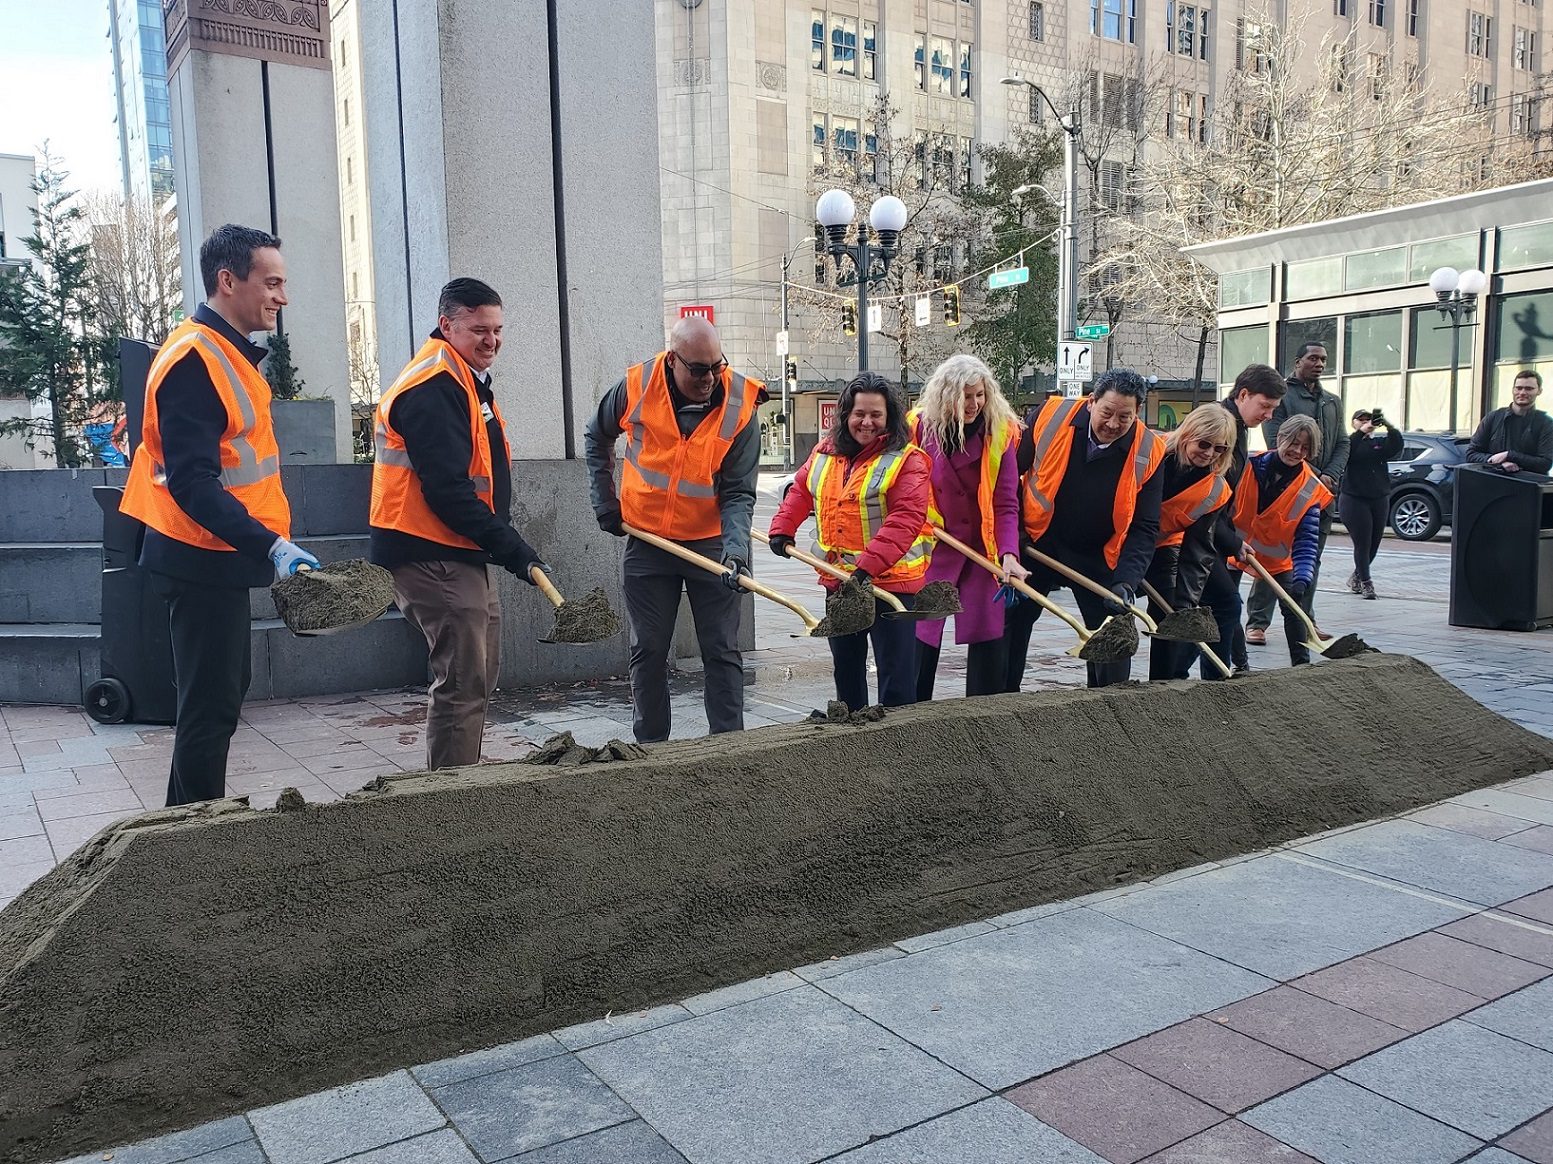 Several people wearing orange vests shovel dirt in the city, along a plaza area, with large buildings in the background.